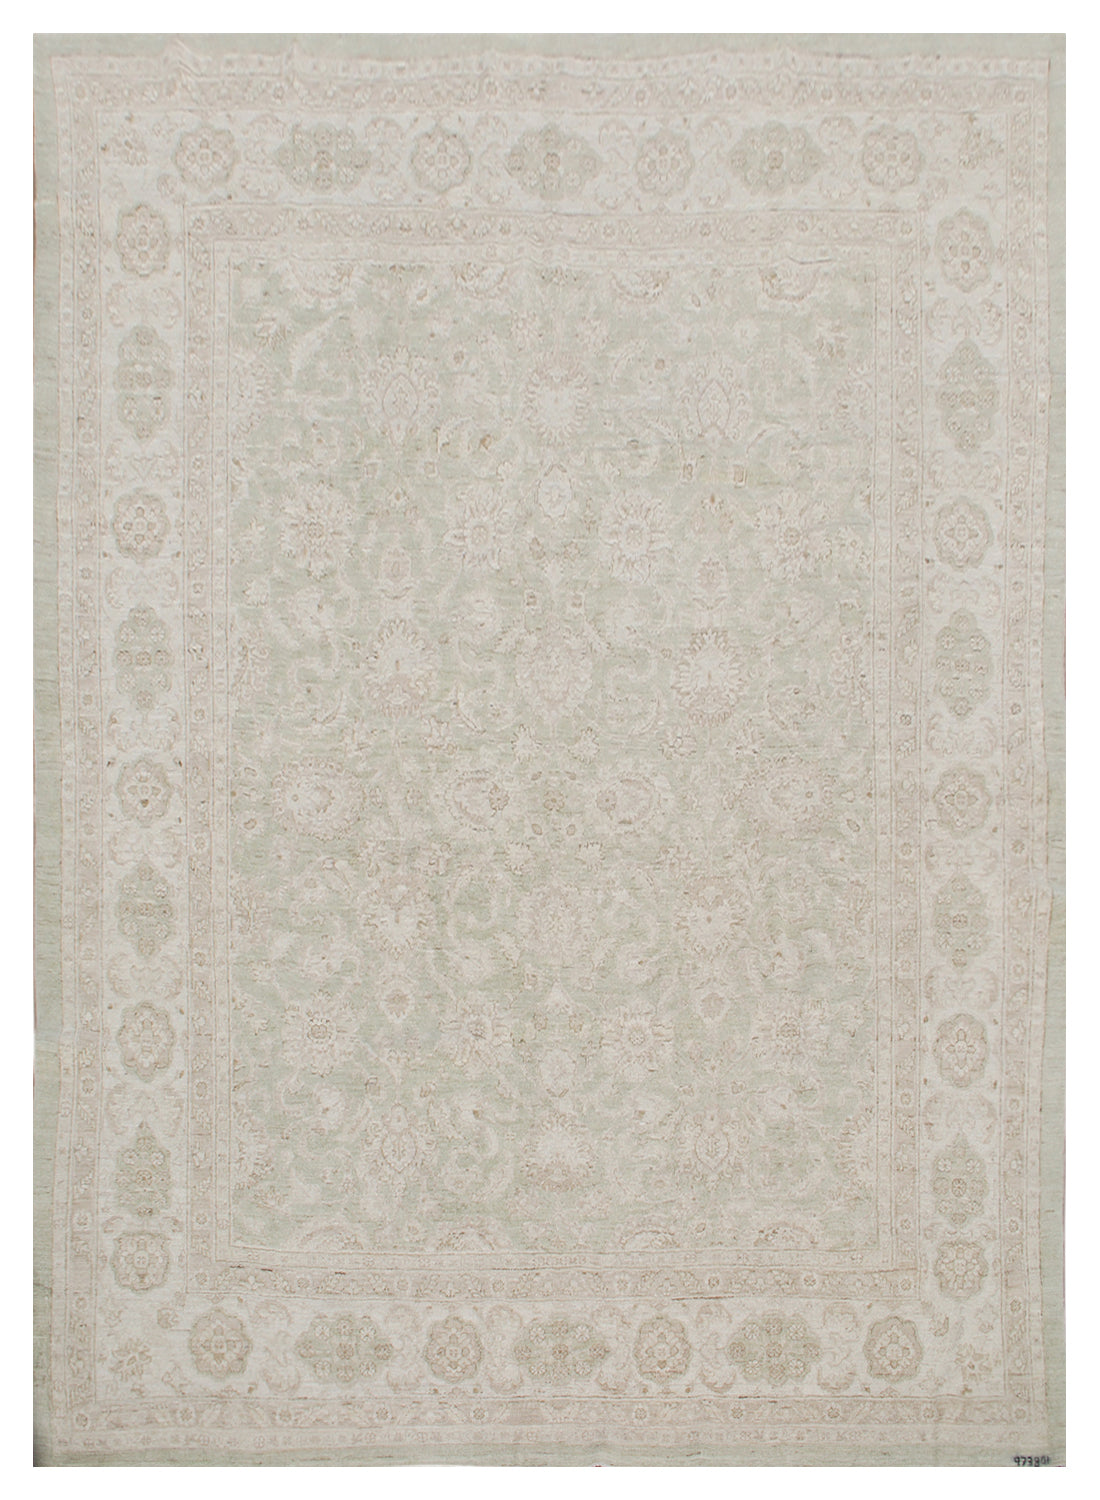 9.07 x  7.08 Soft and Pale Green and Pink Color and Faded Persian Design Ariana Transitional